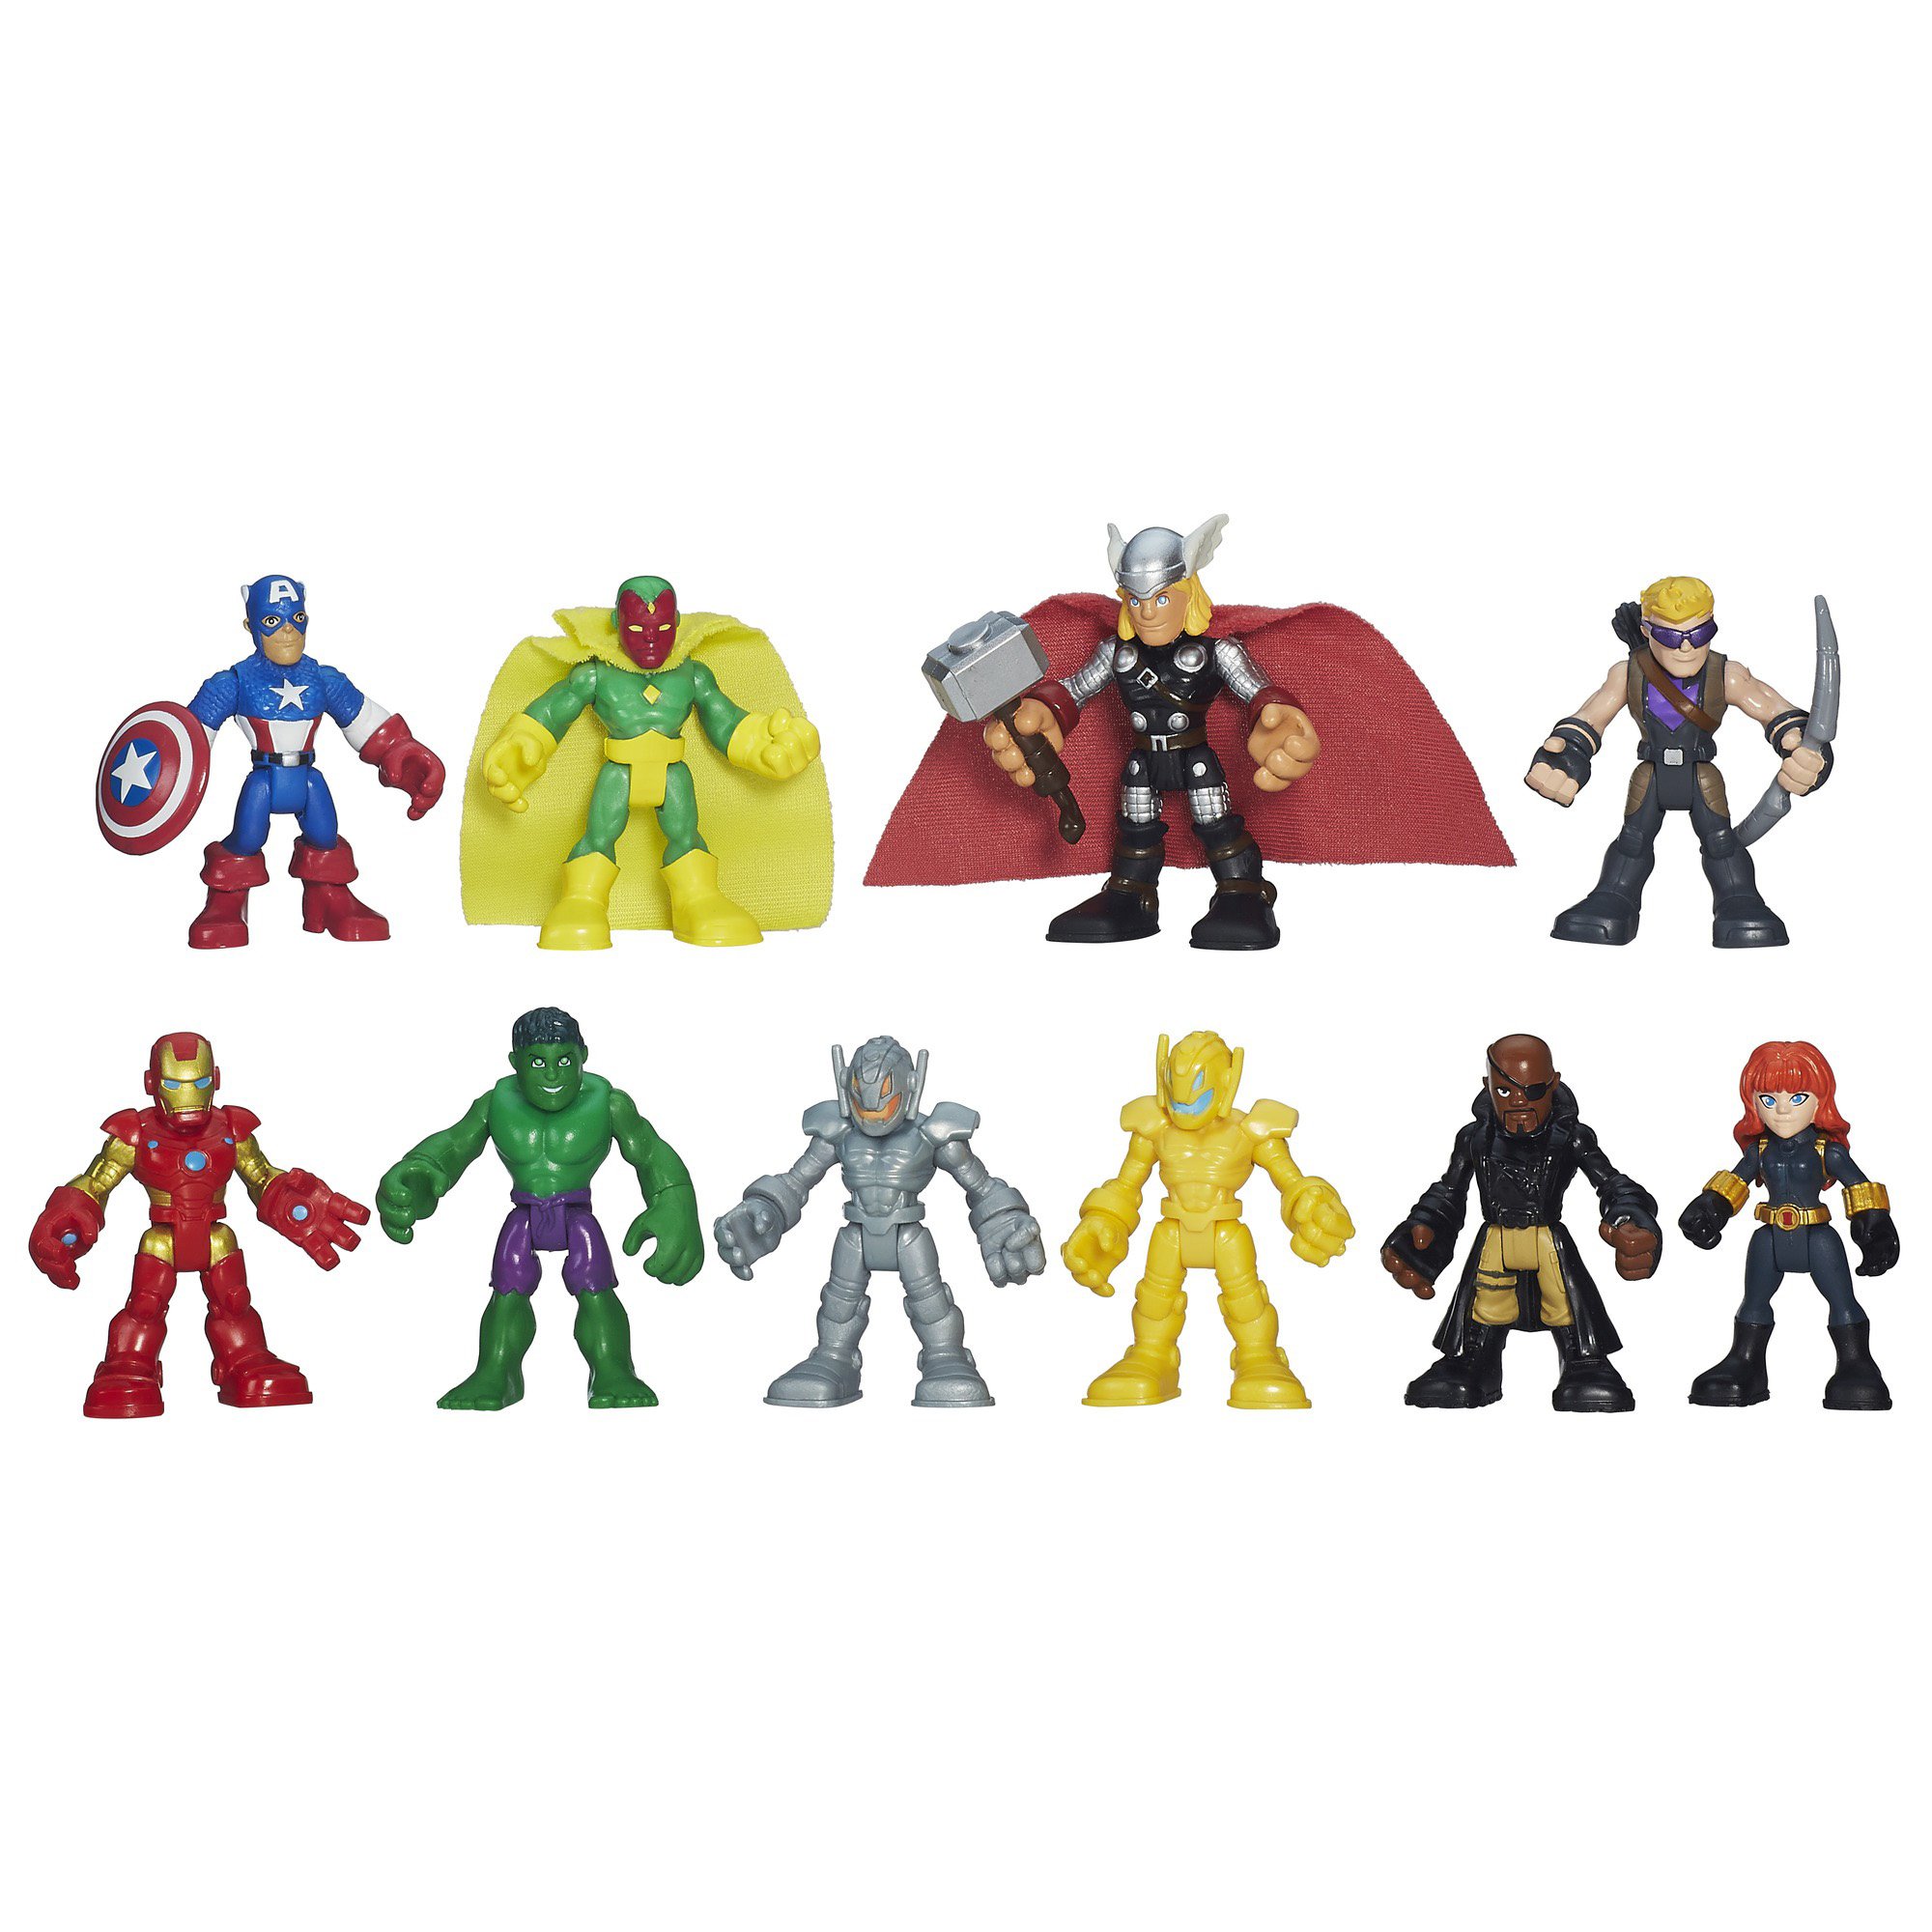 Playskool Heroes Marvel Super Hero Adventures Ultimate Set, 10 Collectible 2.5-Inch Action Figures, Toys for Kids Ages 3 and Up (Amazon Exclusive)